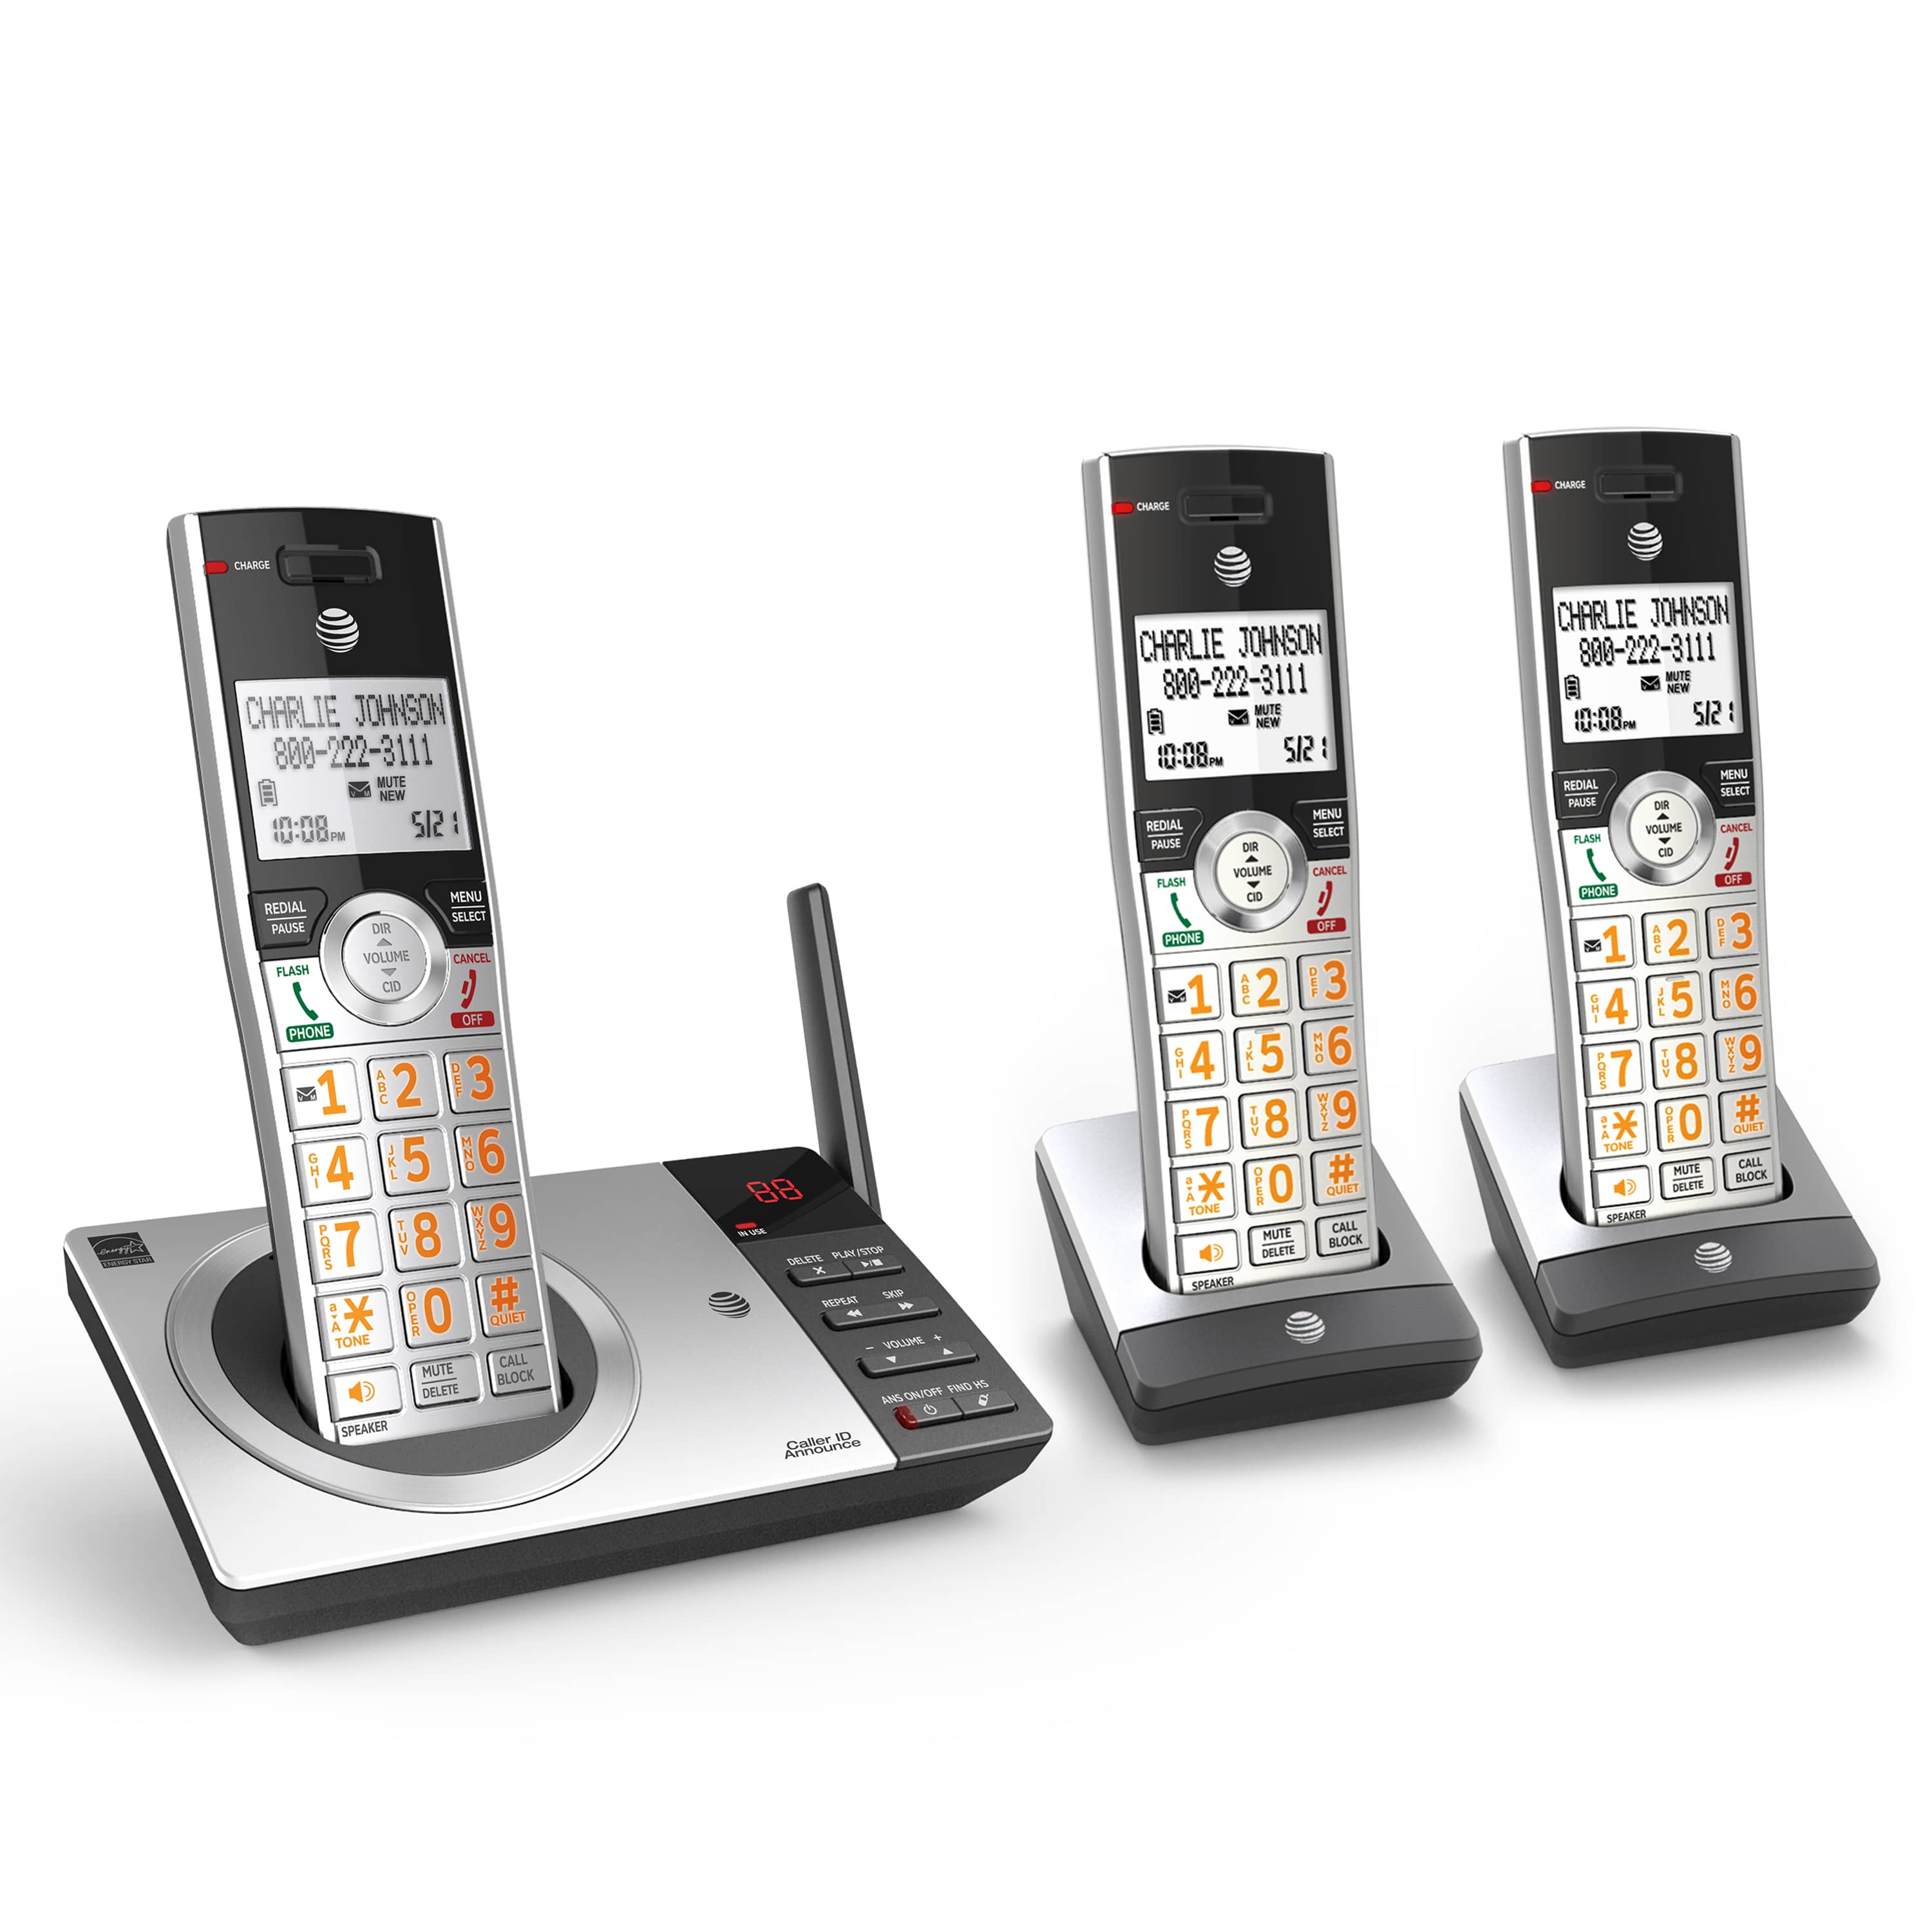 3 handset cordless answering system with cordless headset - view 3